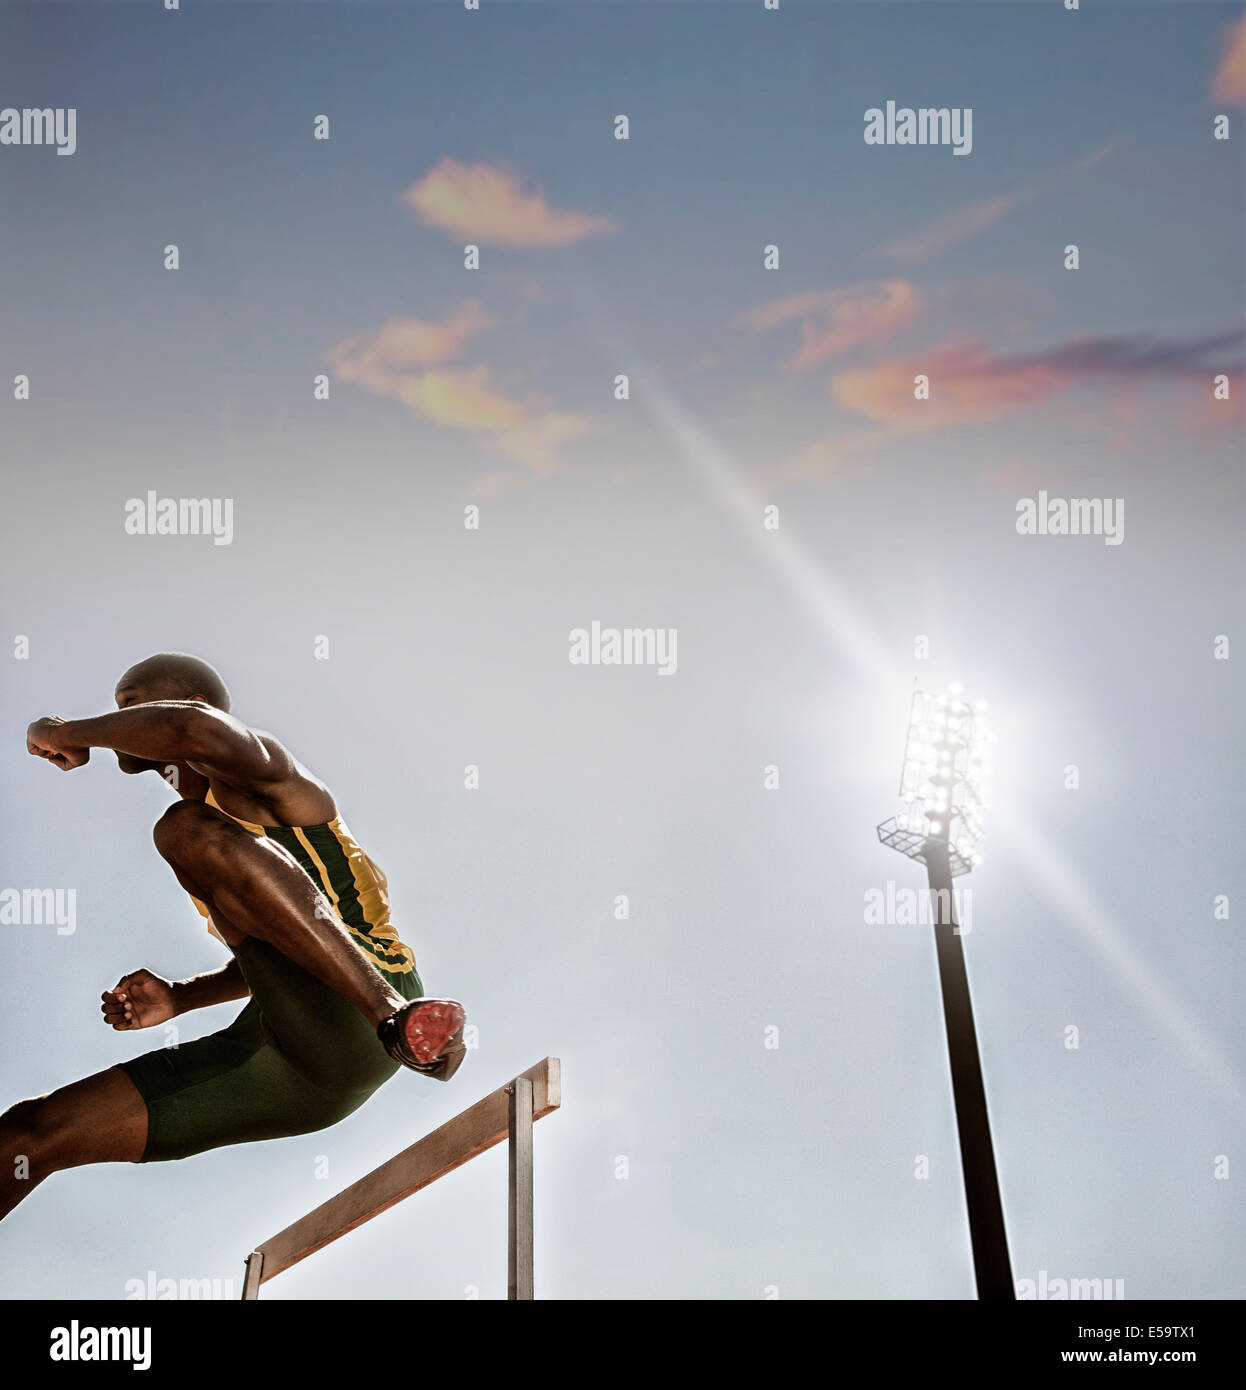 Track and field athlete clearing hurdle Stock Photo